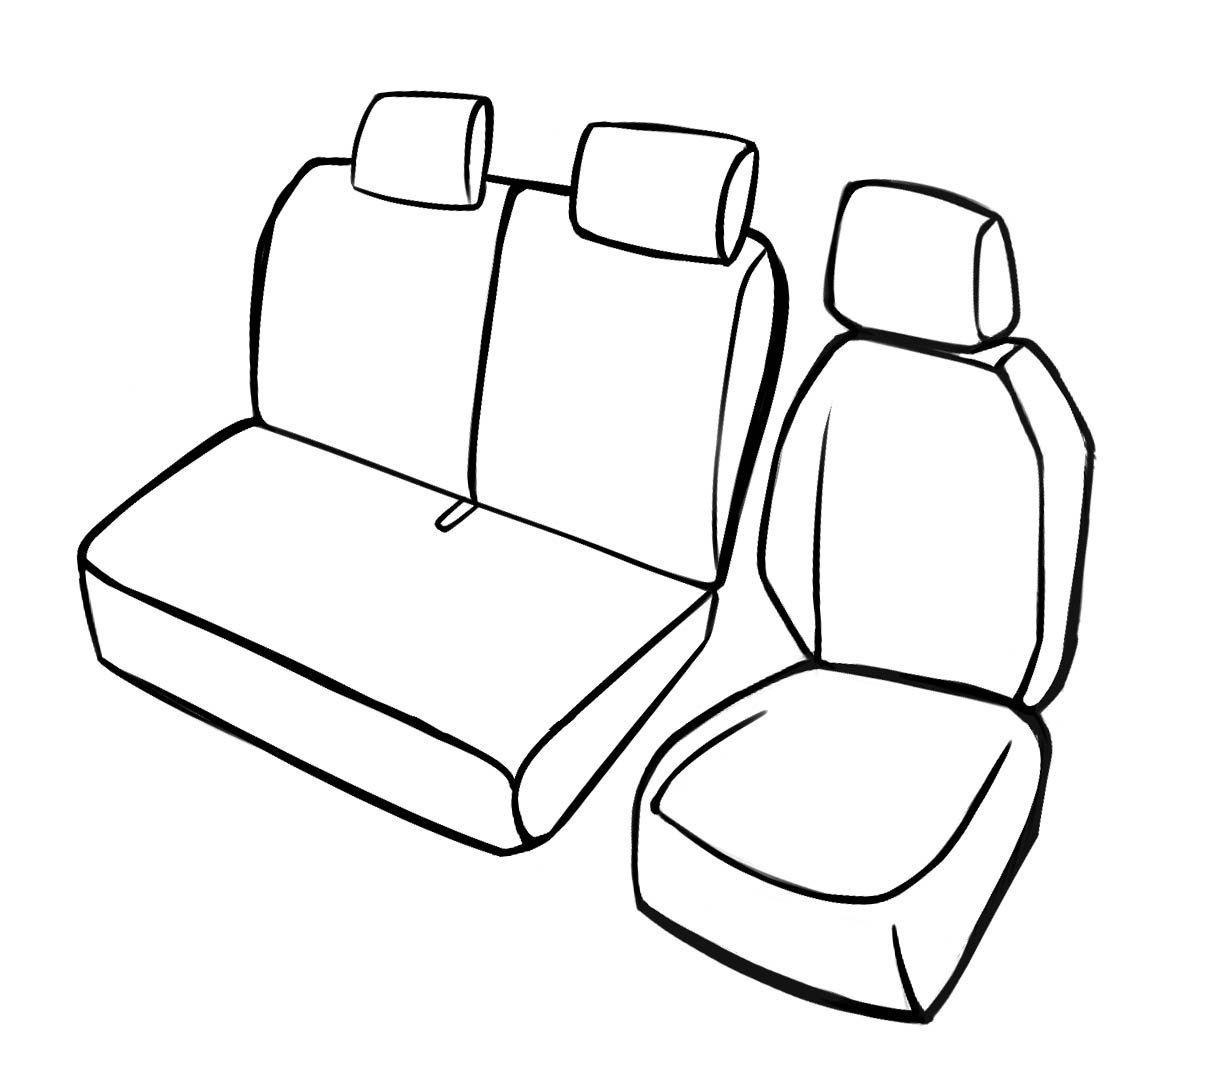 Premium Seat Cover for Fiat Doblo 02/2010-Today, 1 single seat cover front, 1 double bench cover